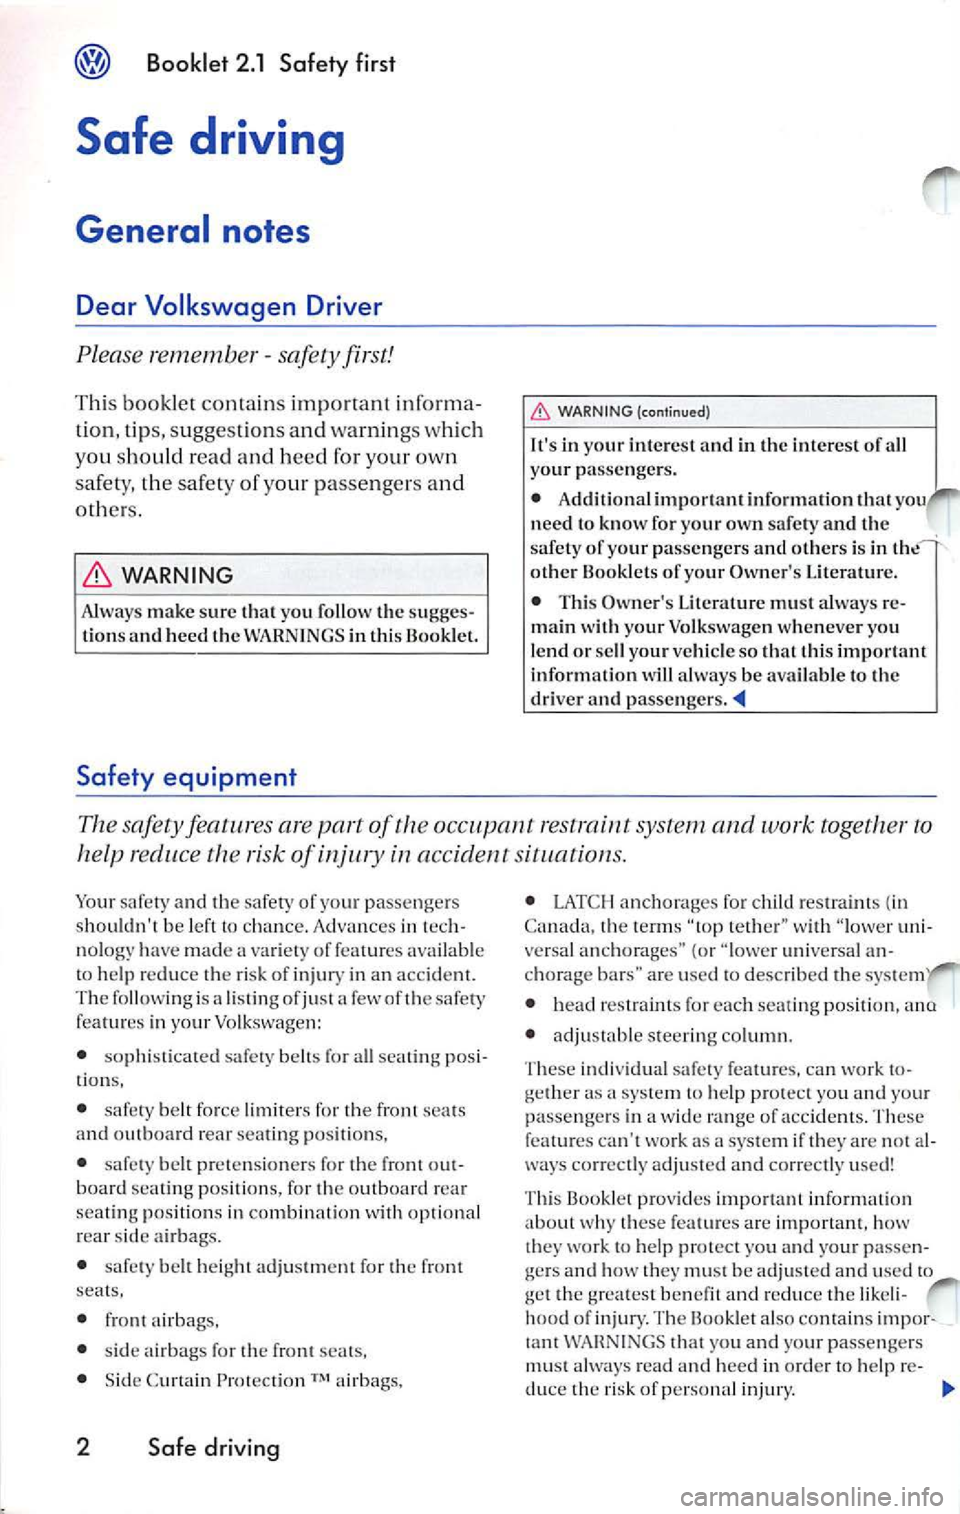 VOLKSWAGEN JETTA 2007  Owners Manual Booklet  2.1  Safety  first 
Safe  driving 
Gene ral  notes 
Dear  Vo lkswagen  Driver 
Plea se remembe r -safety  first! 
This  booklet  conta in s impo rtan t informa­
tio n, tip s, suggest ions  a